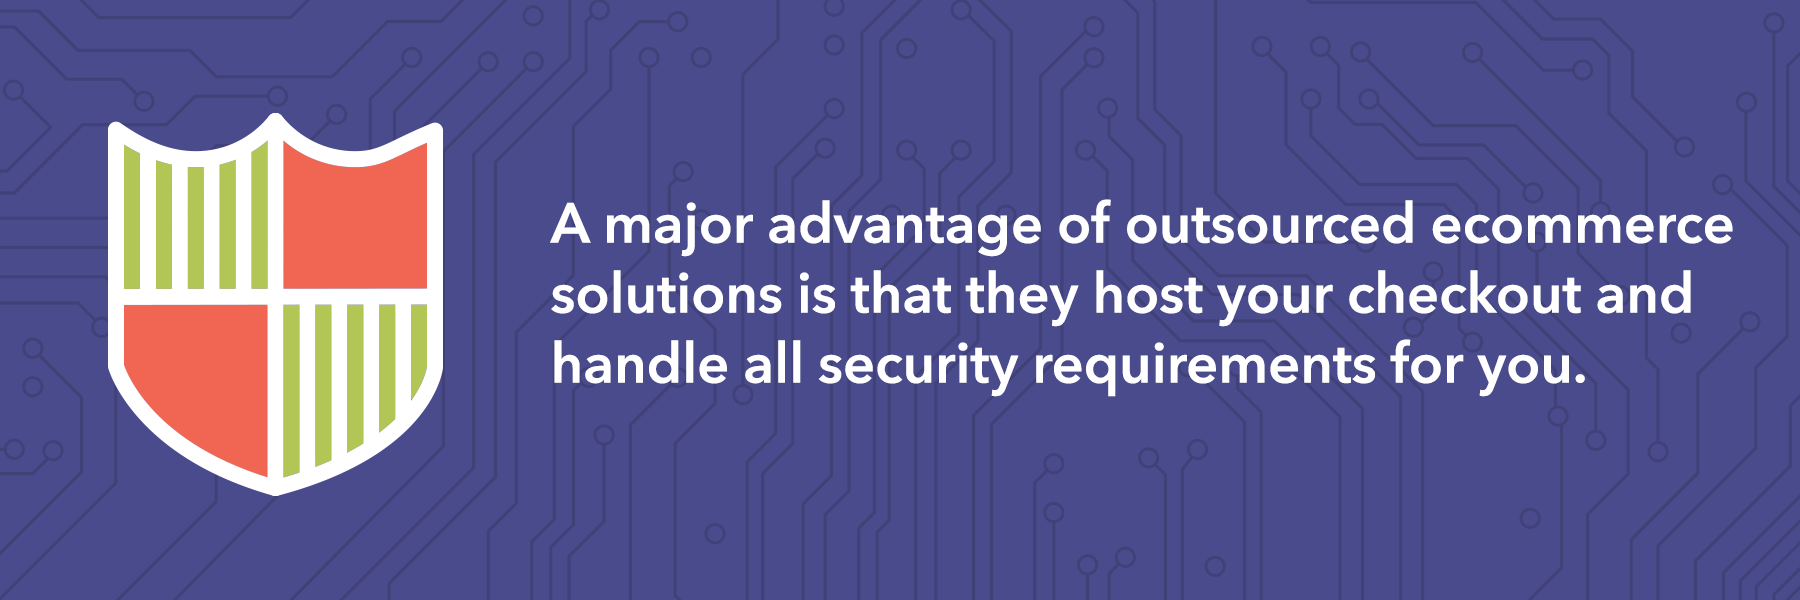 A major advantage of hosted ecommerce solutions is that they handle all the security requirements for you.